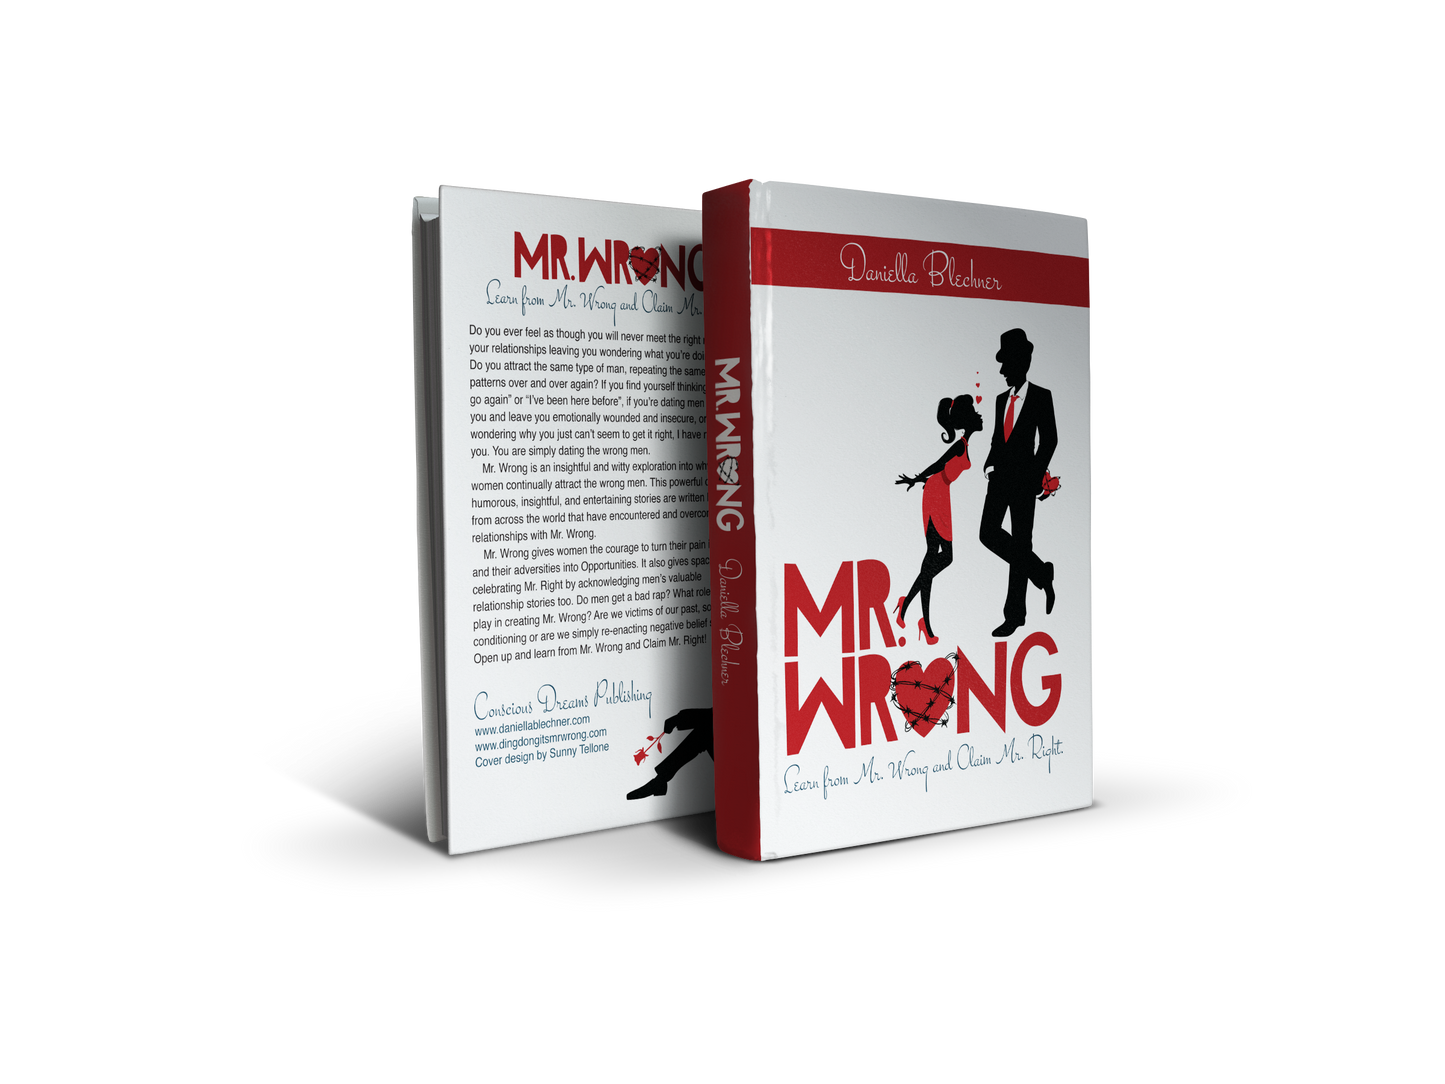 Mr Wrong: Learn from Mr Wrong and Claim Mr Right